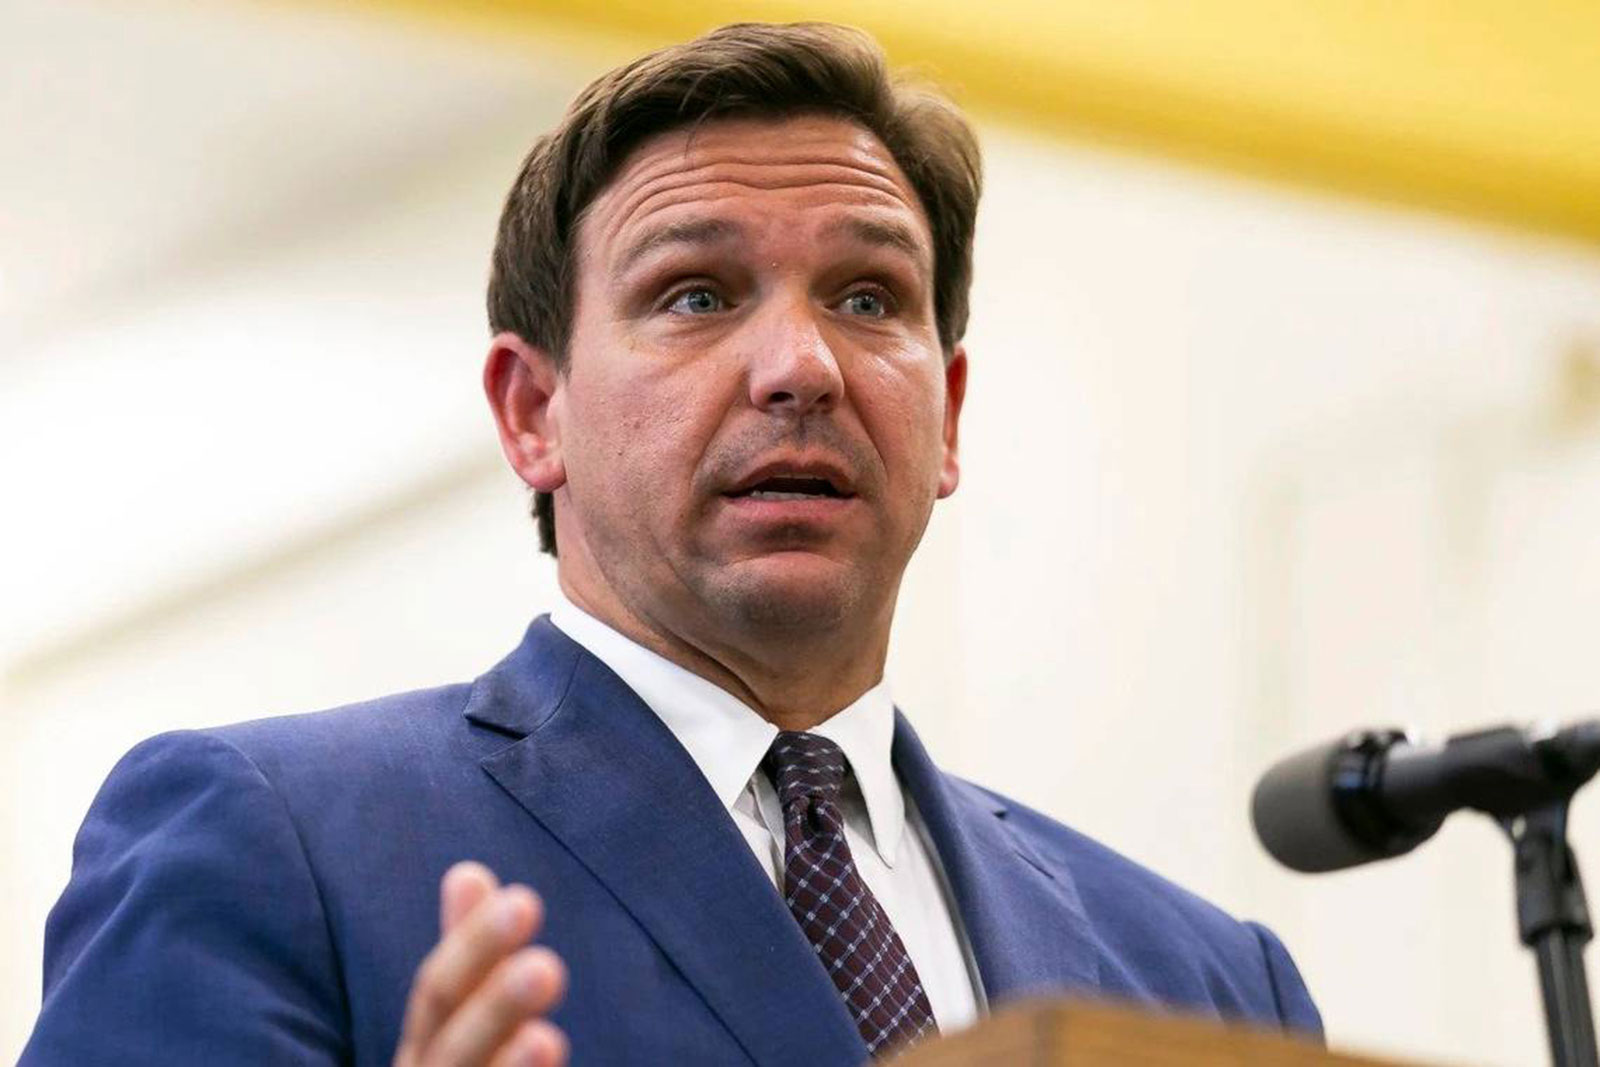 Florida Gov. Ron DeSantis in a suit and tie speaks from behind a lectern and gestures with his right hand.